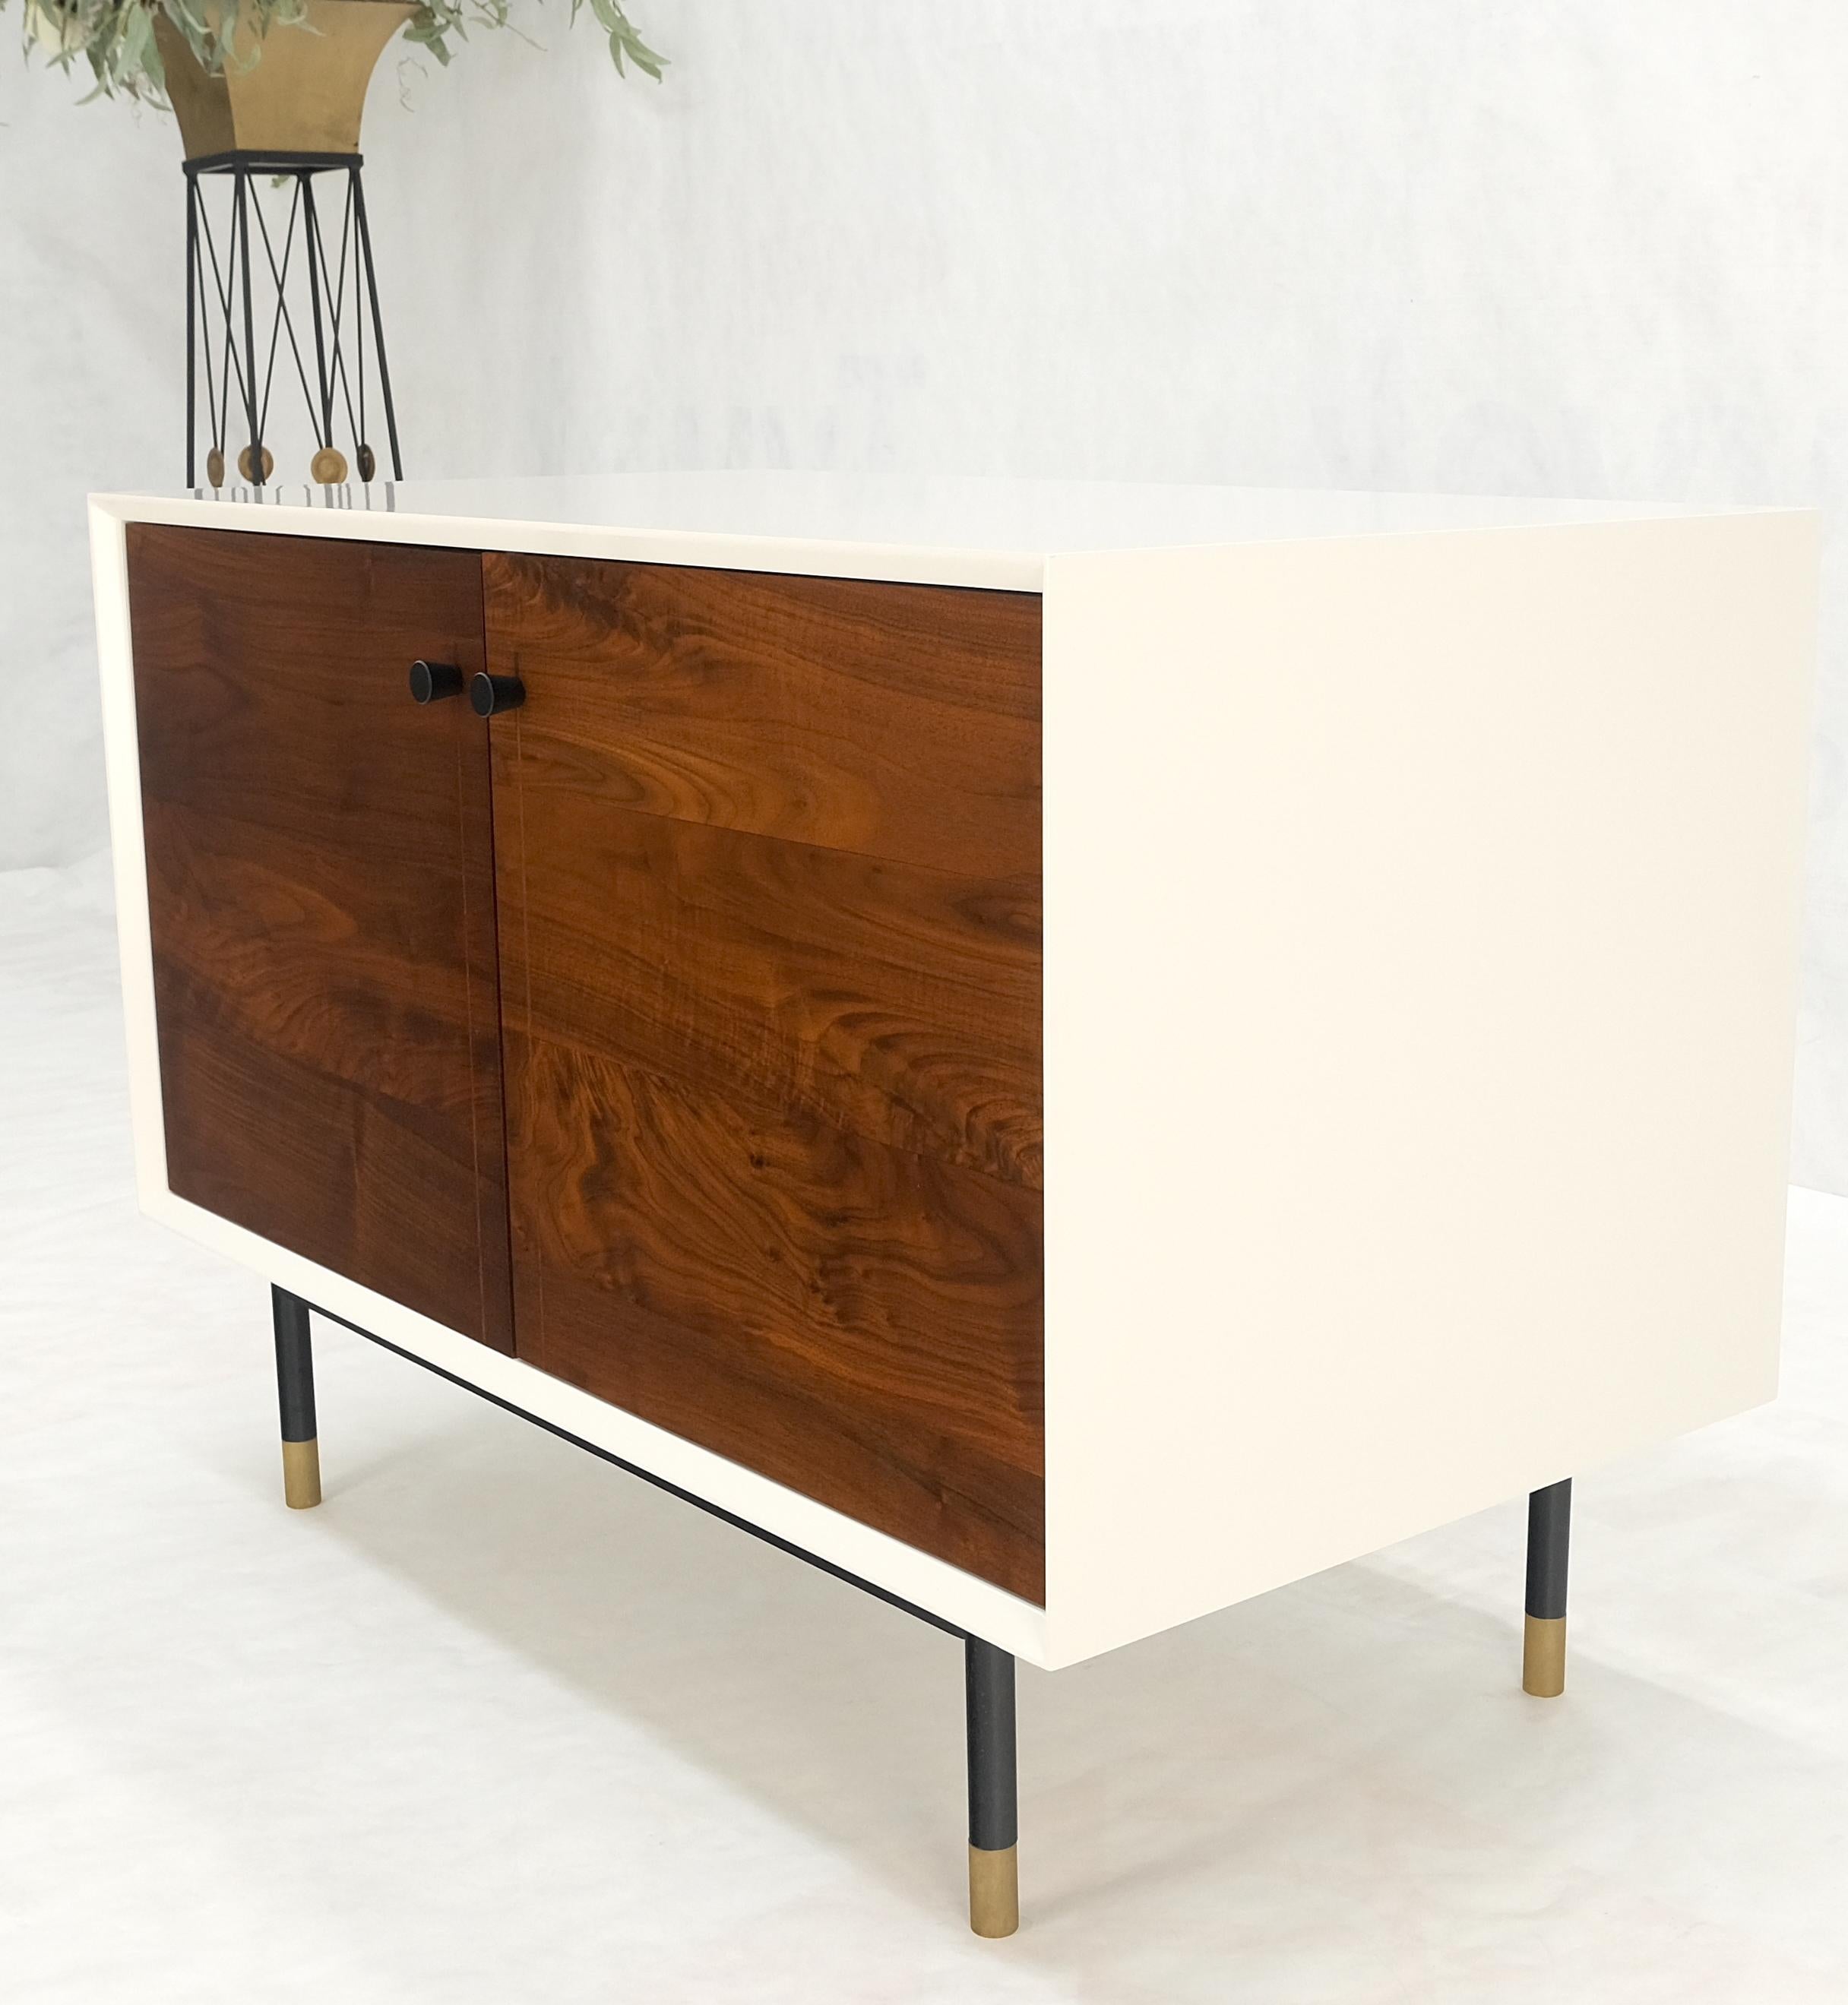 Contemporary White Lacquer Oiled Walnut Double Door Cylinder Legs Brass Tips Legs Credenza For Sale